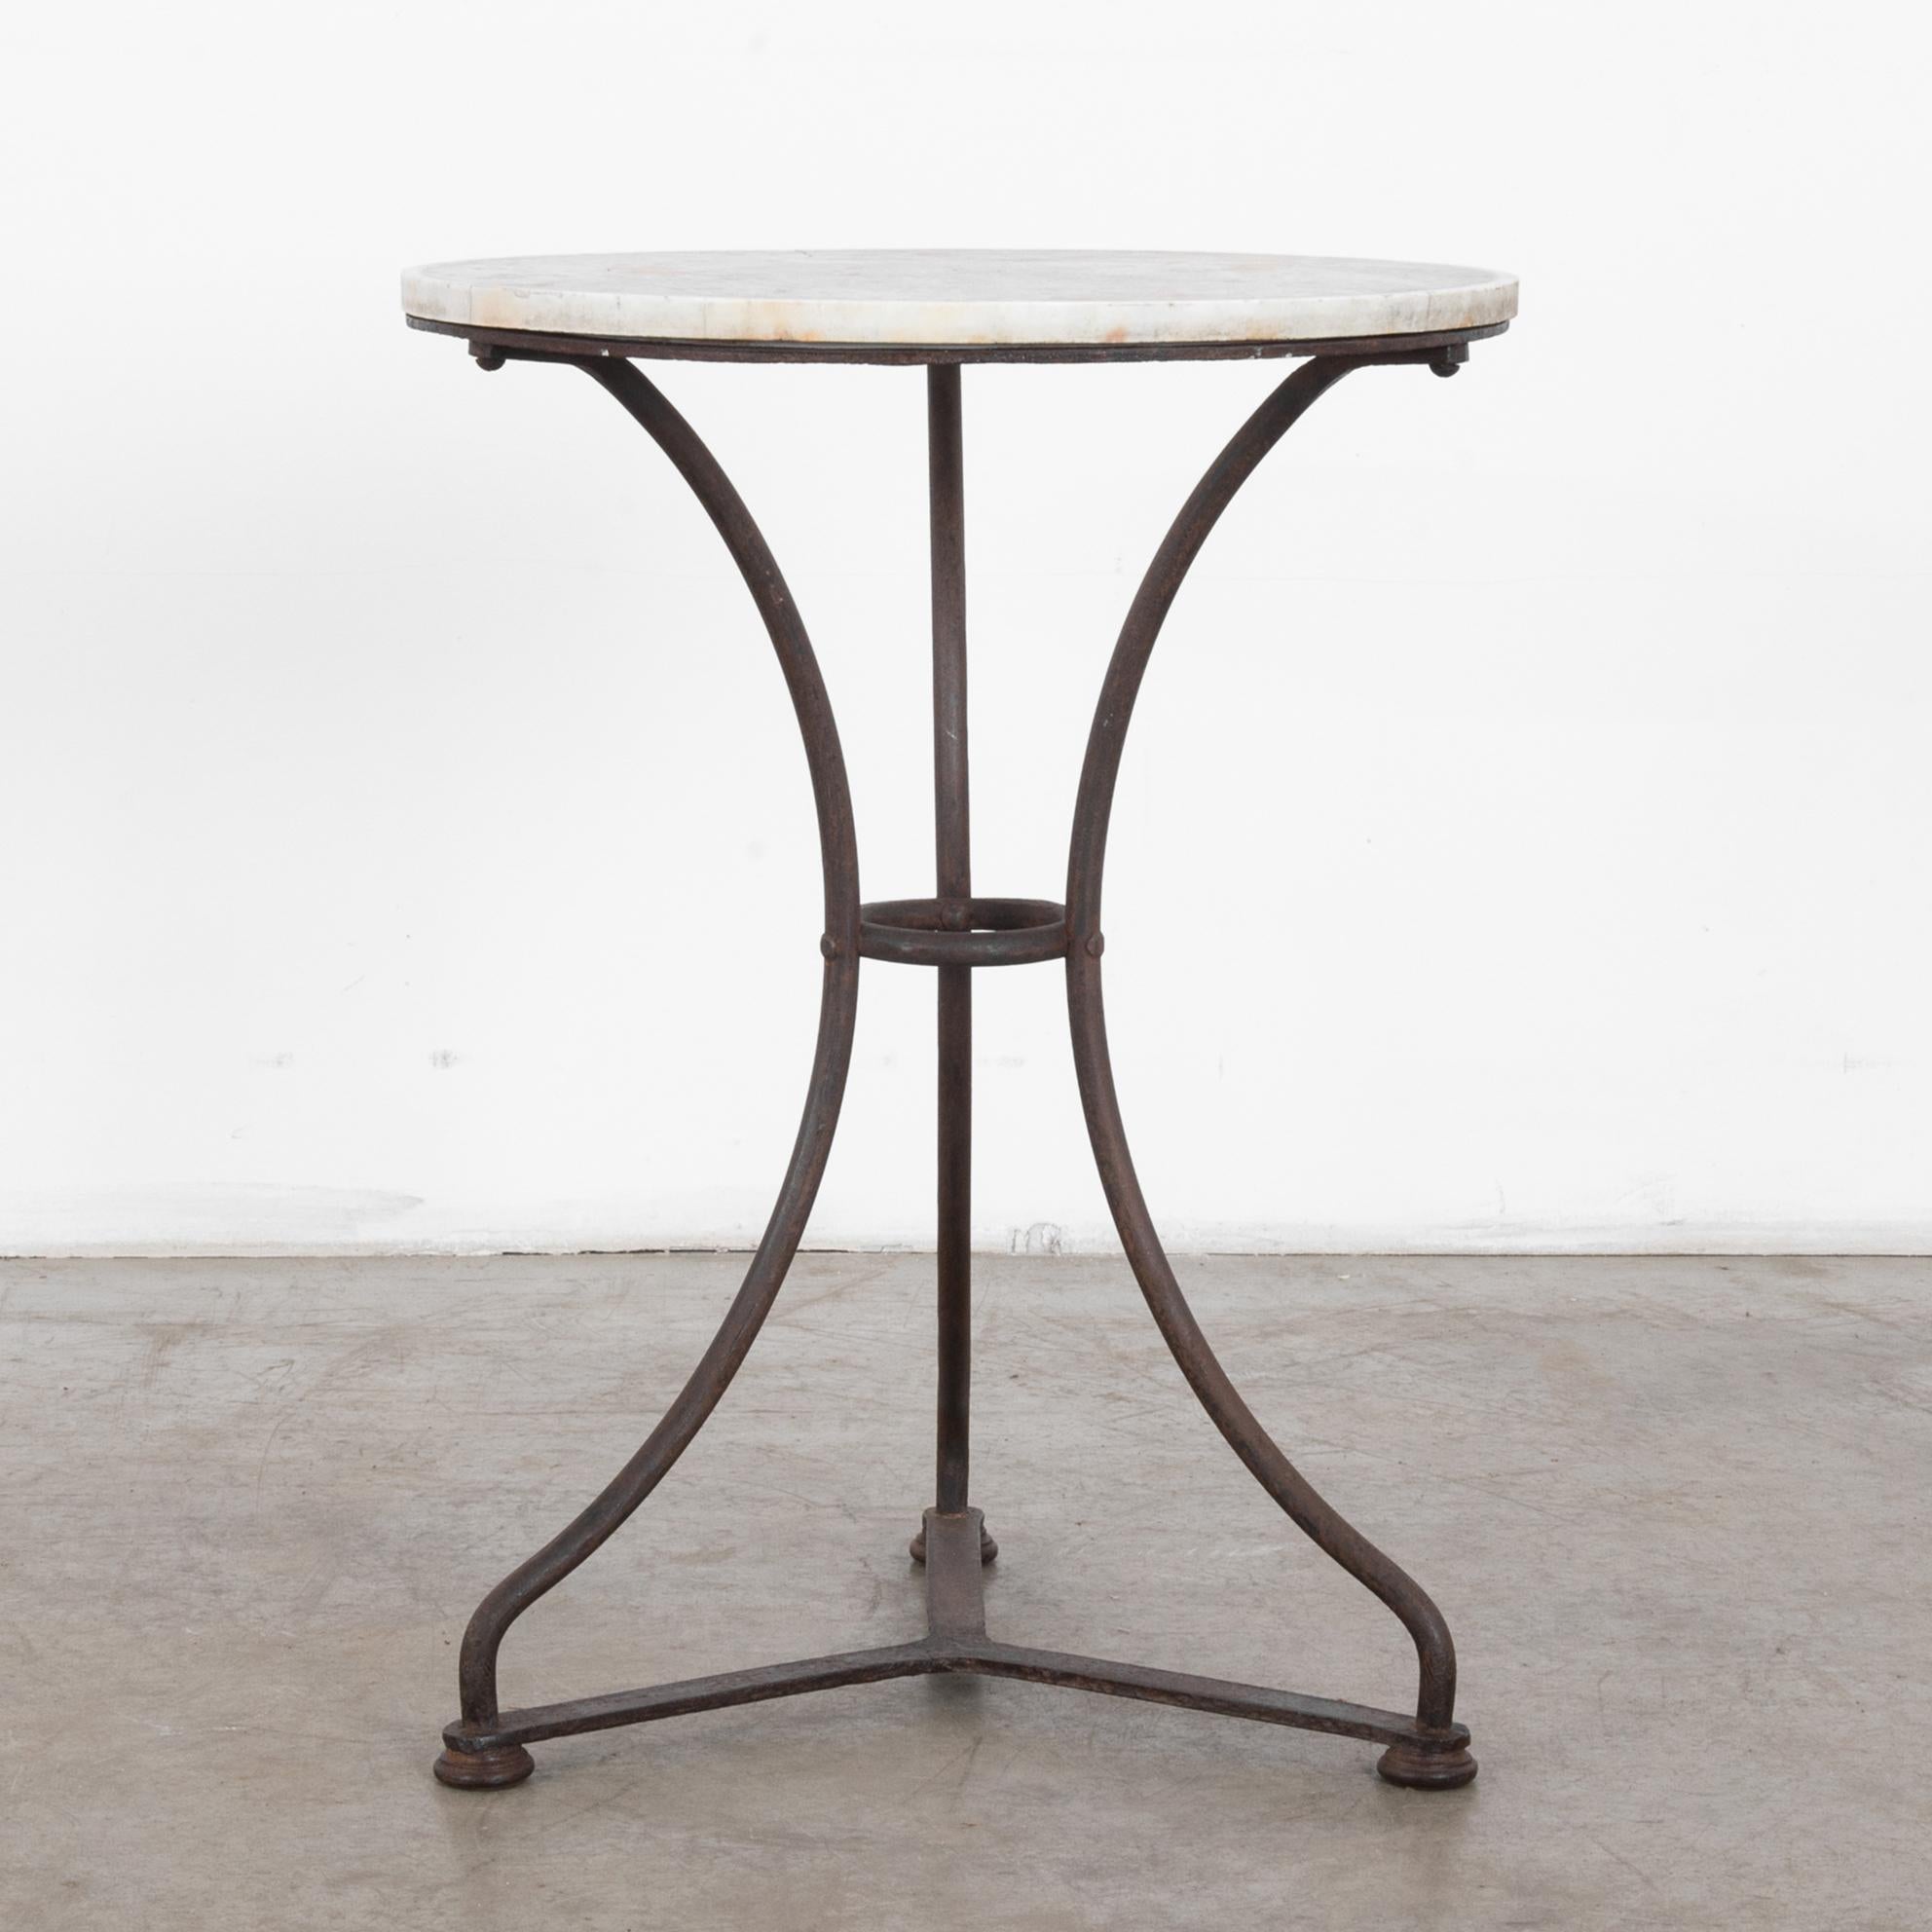 French Provincial Antique French Iron and Marble Side Table